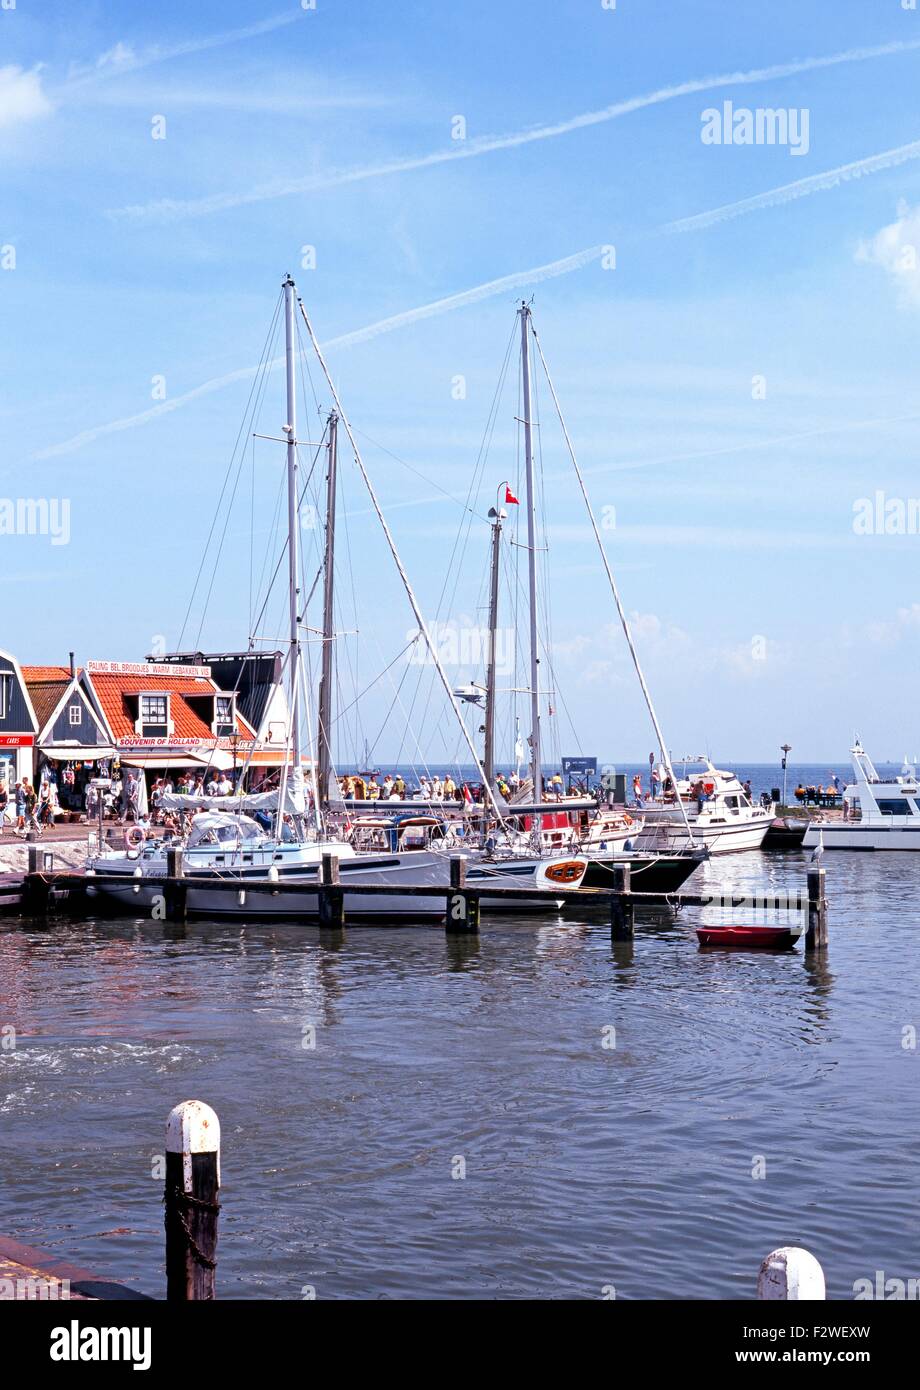 Yachts moored in the harbour with pavement cafes to the rear, Volendam, Holland, Netherlands, Europe. Stock Photo